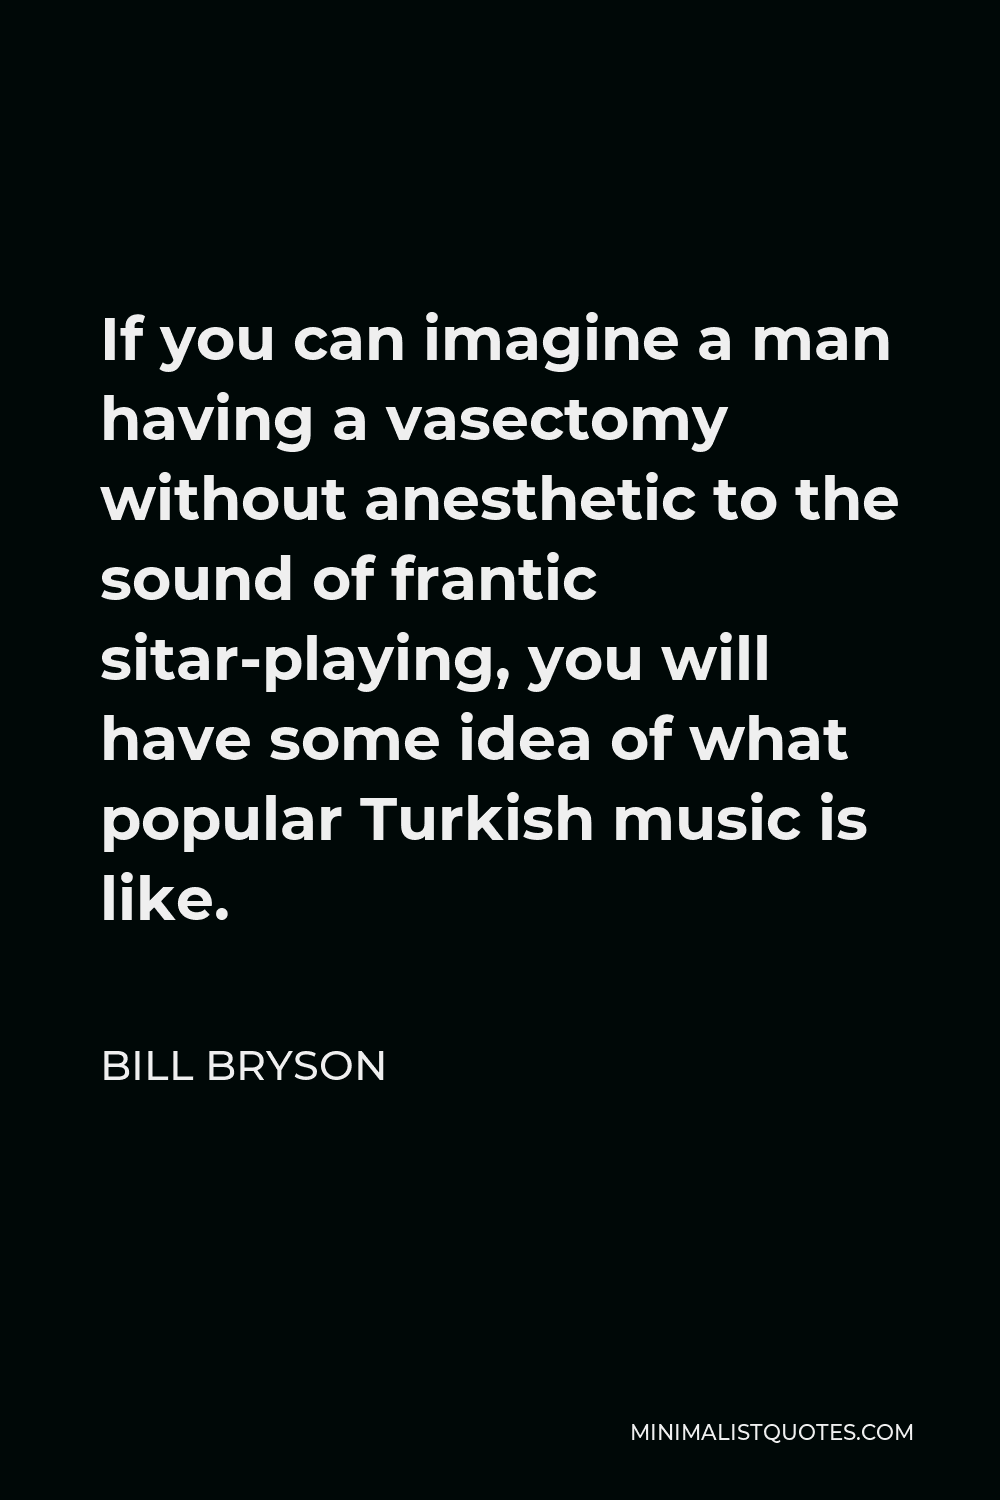 Bill Bryson Quote - If you can imagine a man having a vasectomy without anesthetic to the sound of frantic sitar-playing, you will have some idea of what popular Turkish music is like.